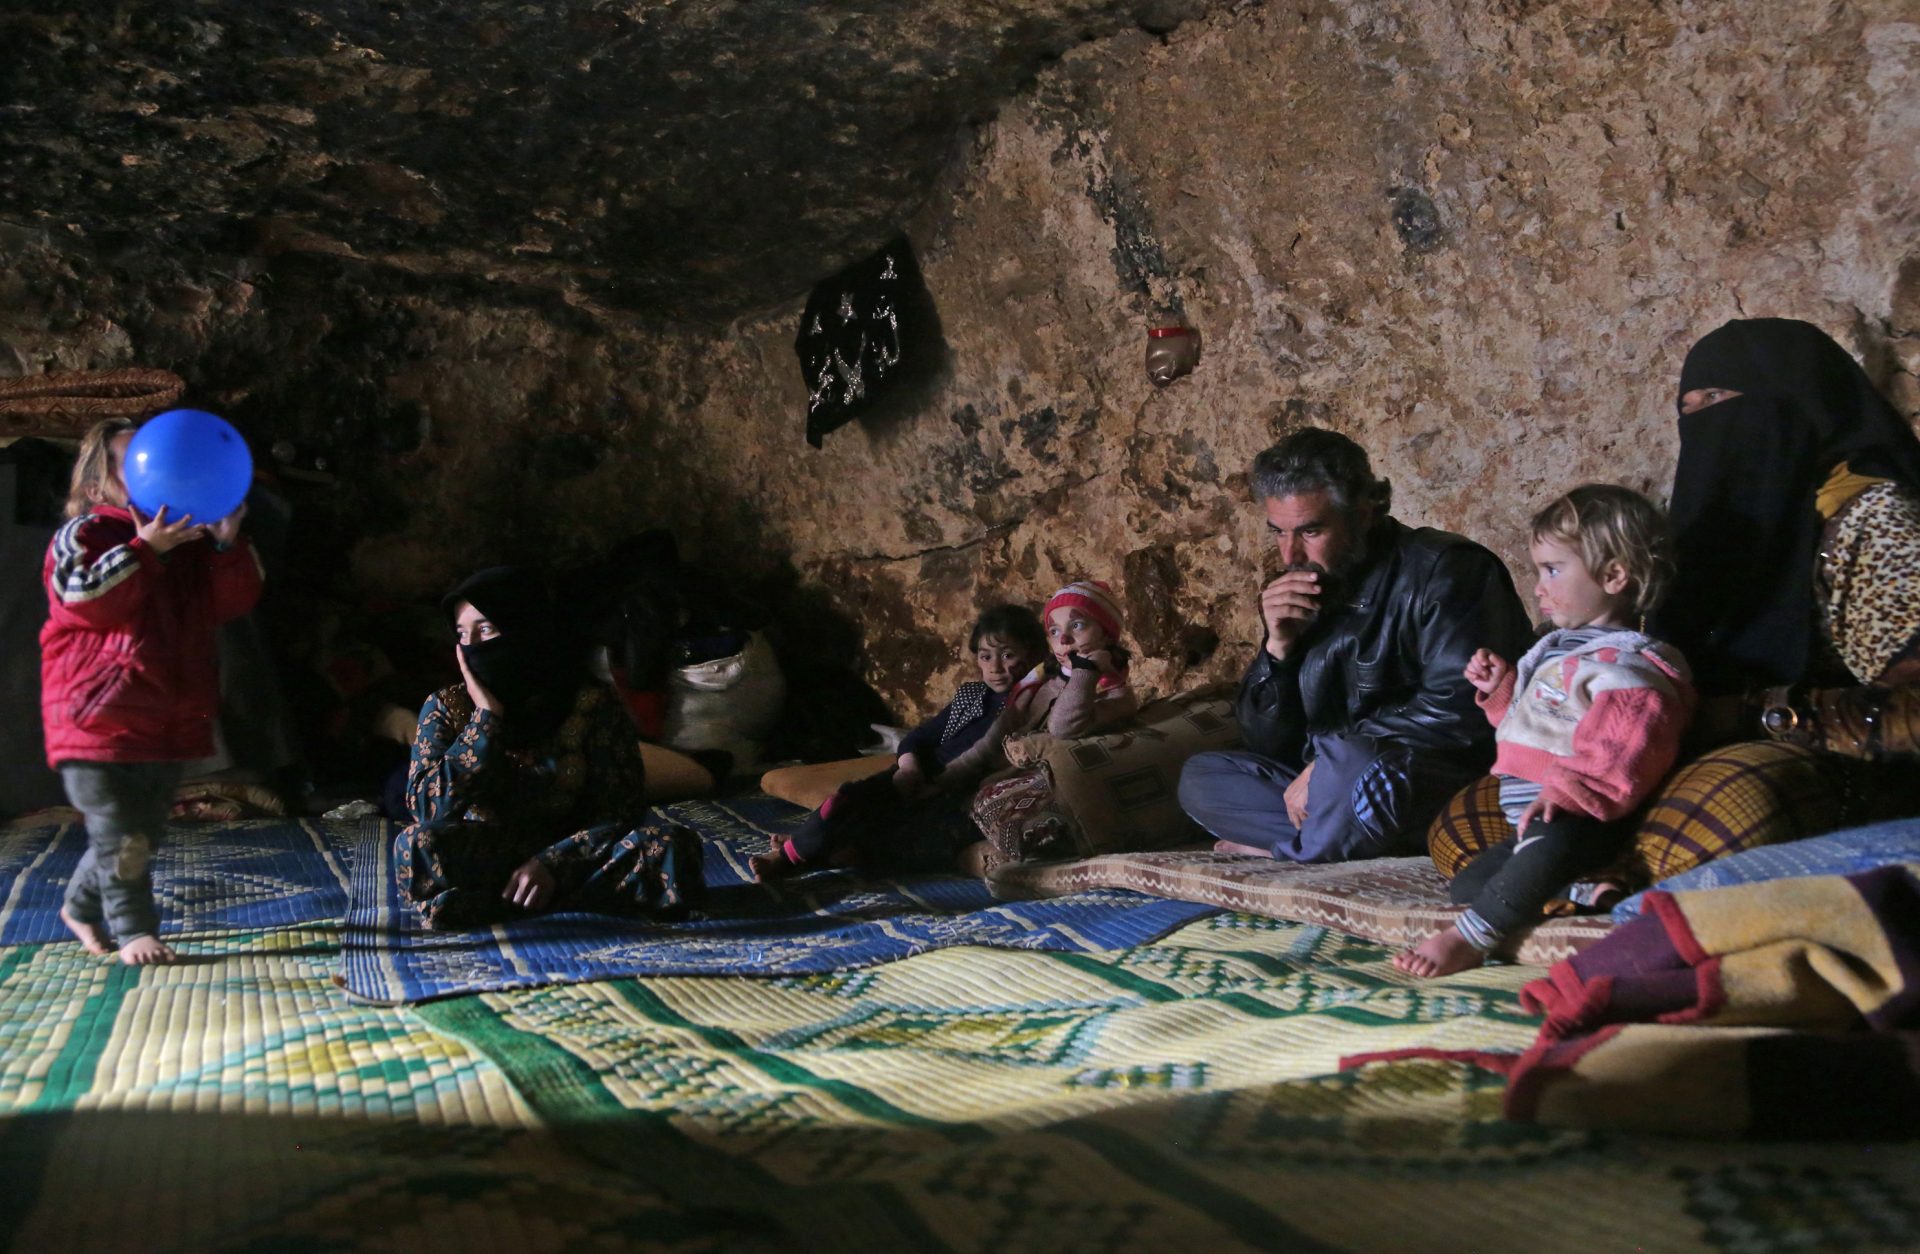 Members of a family of internally displaced Syrians sit in an underground shelter in Idlib province. The photo was taken on Sunday, February 23.